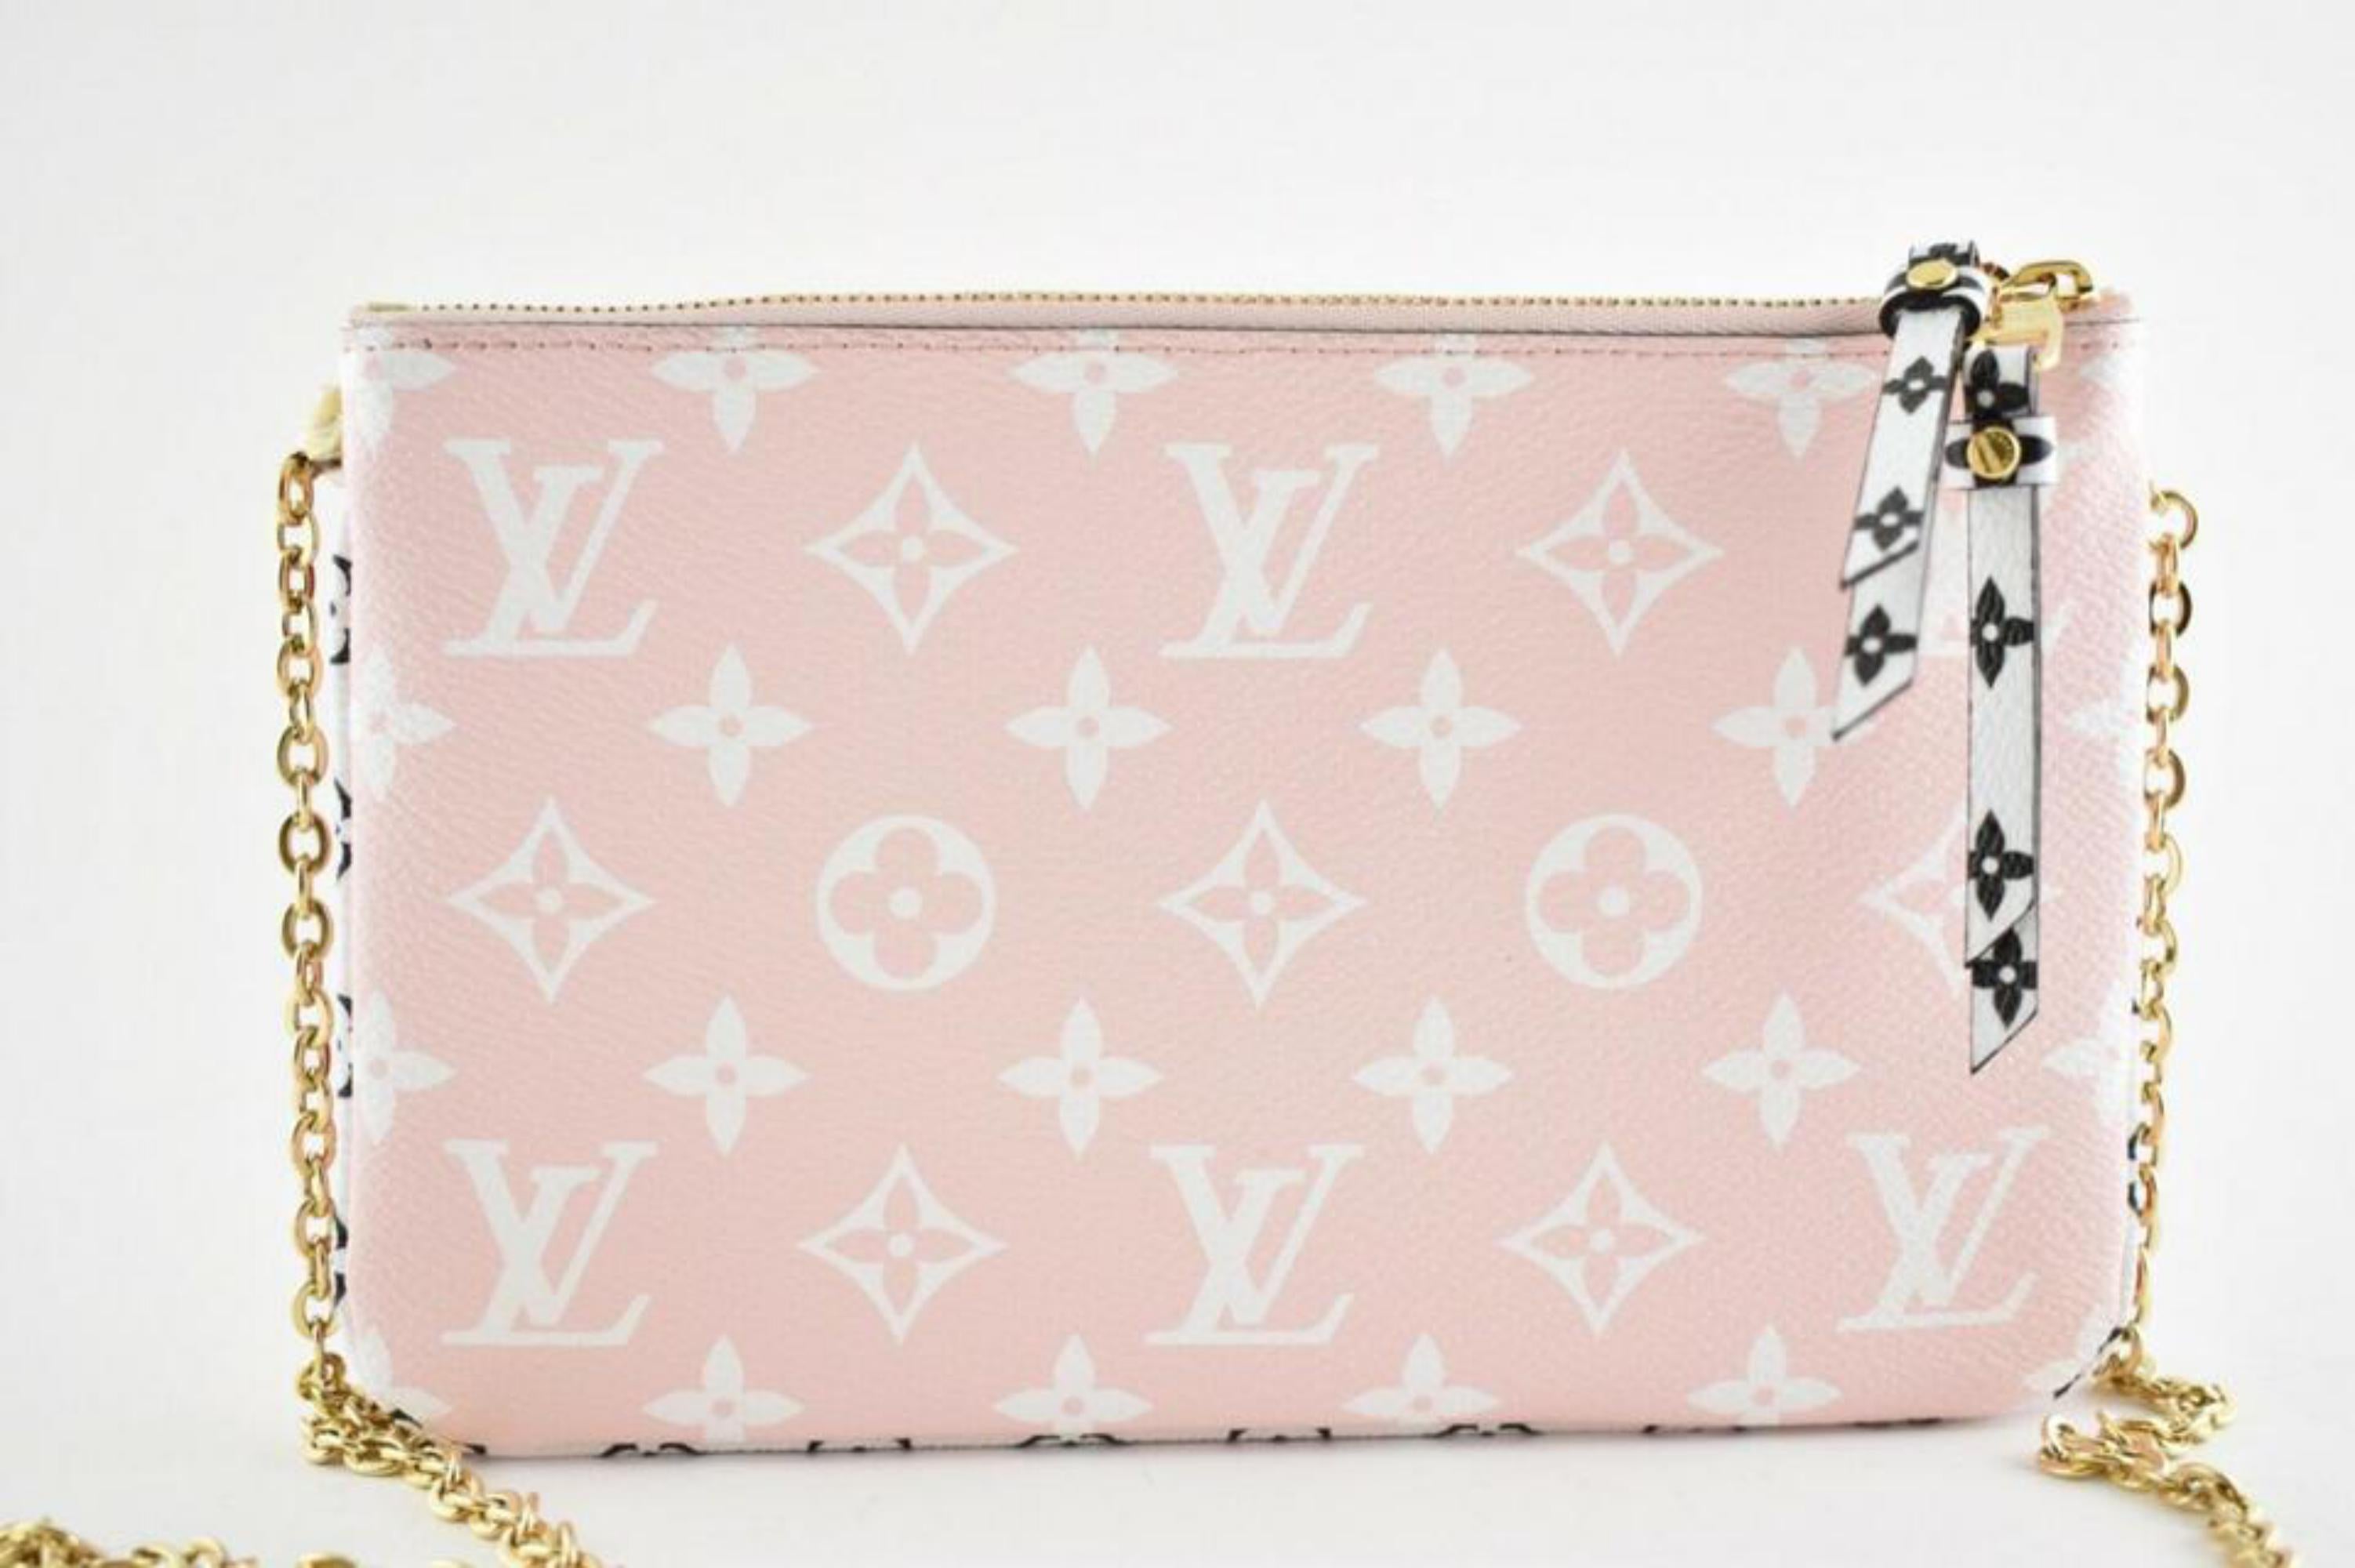 BRAND NEW IN BOX
(10/10 or N)
Includes Dust Bag and Box
Brand: Louis Vuitton
Size: (7.9 x 4.9 x 1.2)
Name: Pochette Double Zip
Color: Red / Pink / White
Style: Crossbody Bag
Material: Monogram Coated Canvas
Red giant logo white front
Pink giant logo